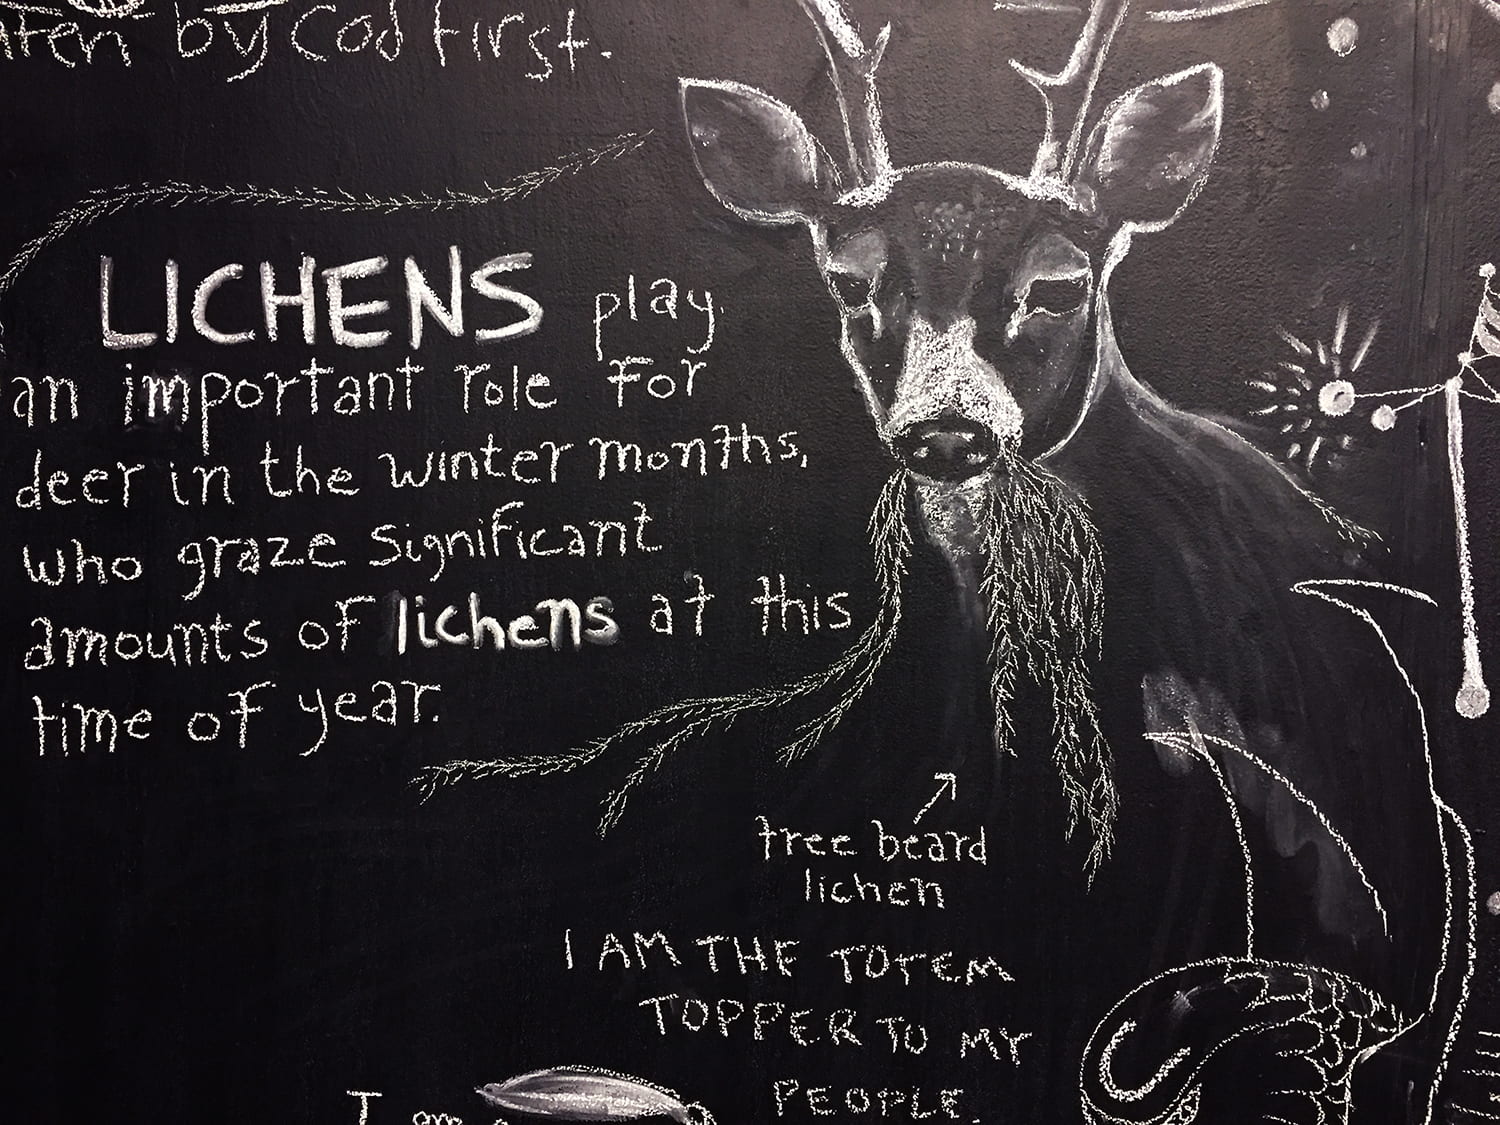 drawing of a deer chewing tree beard lichen, and the words "Lichens play an important role for deer in the winter months, who graze significant amounts of lichens at this time of year."